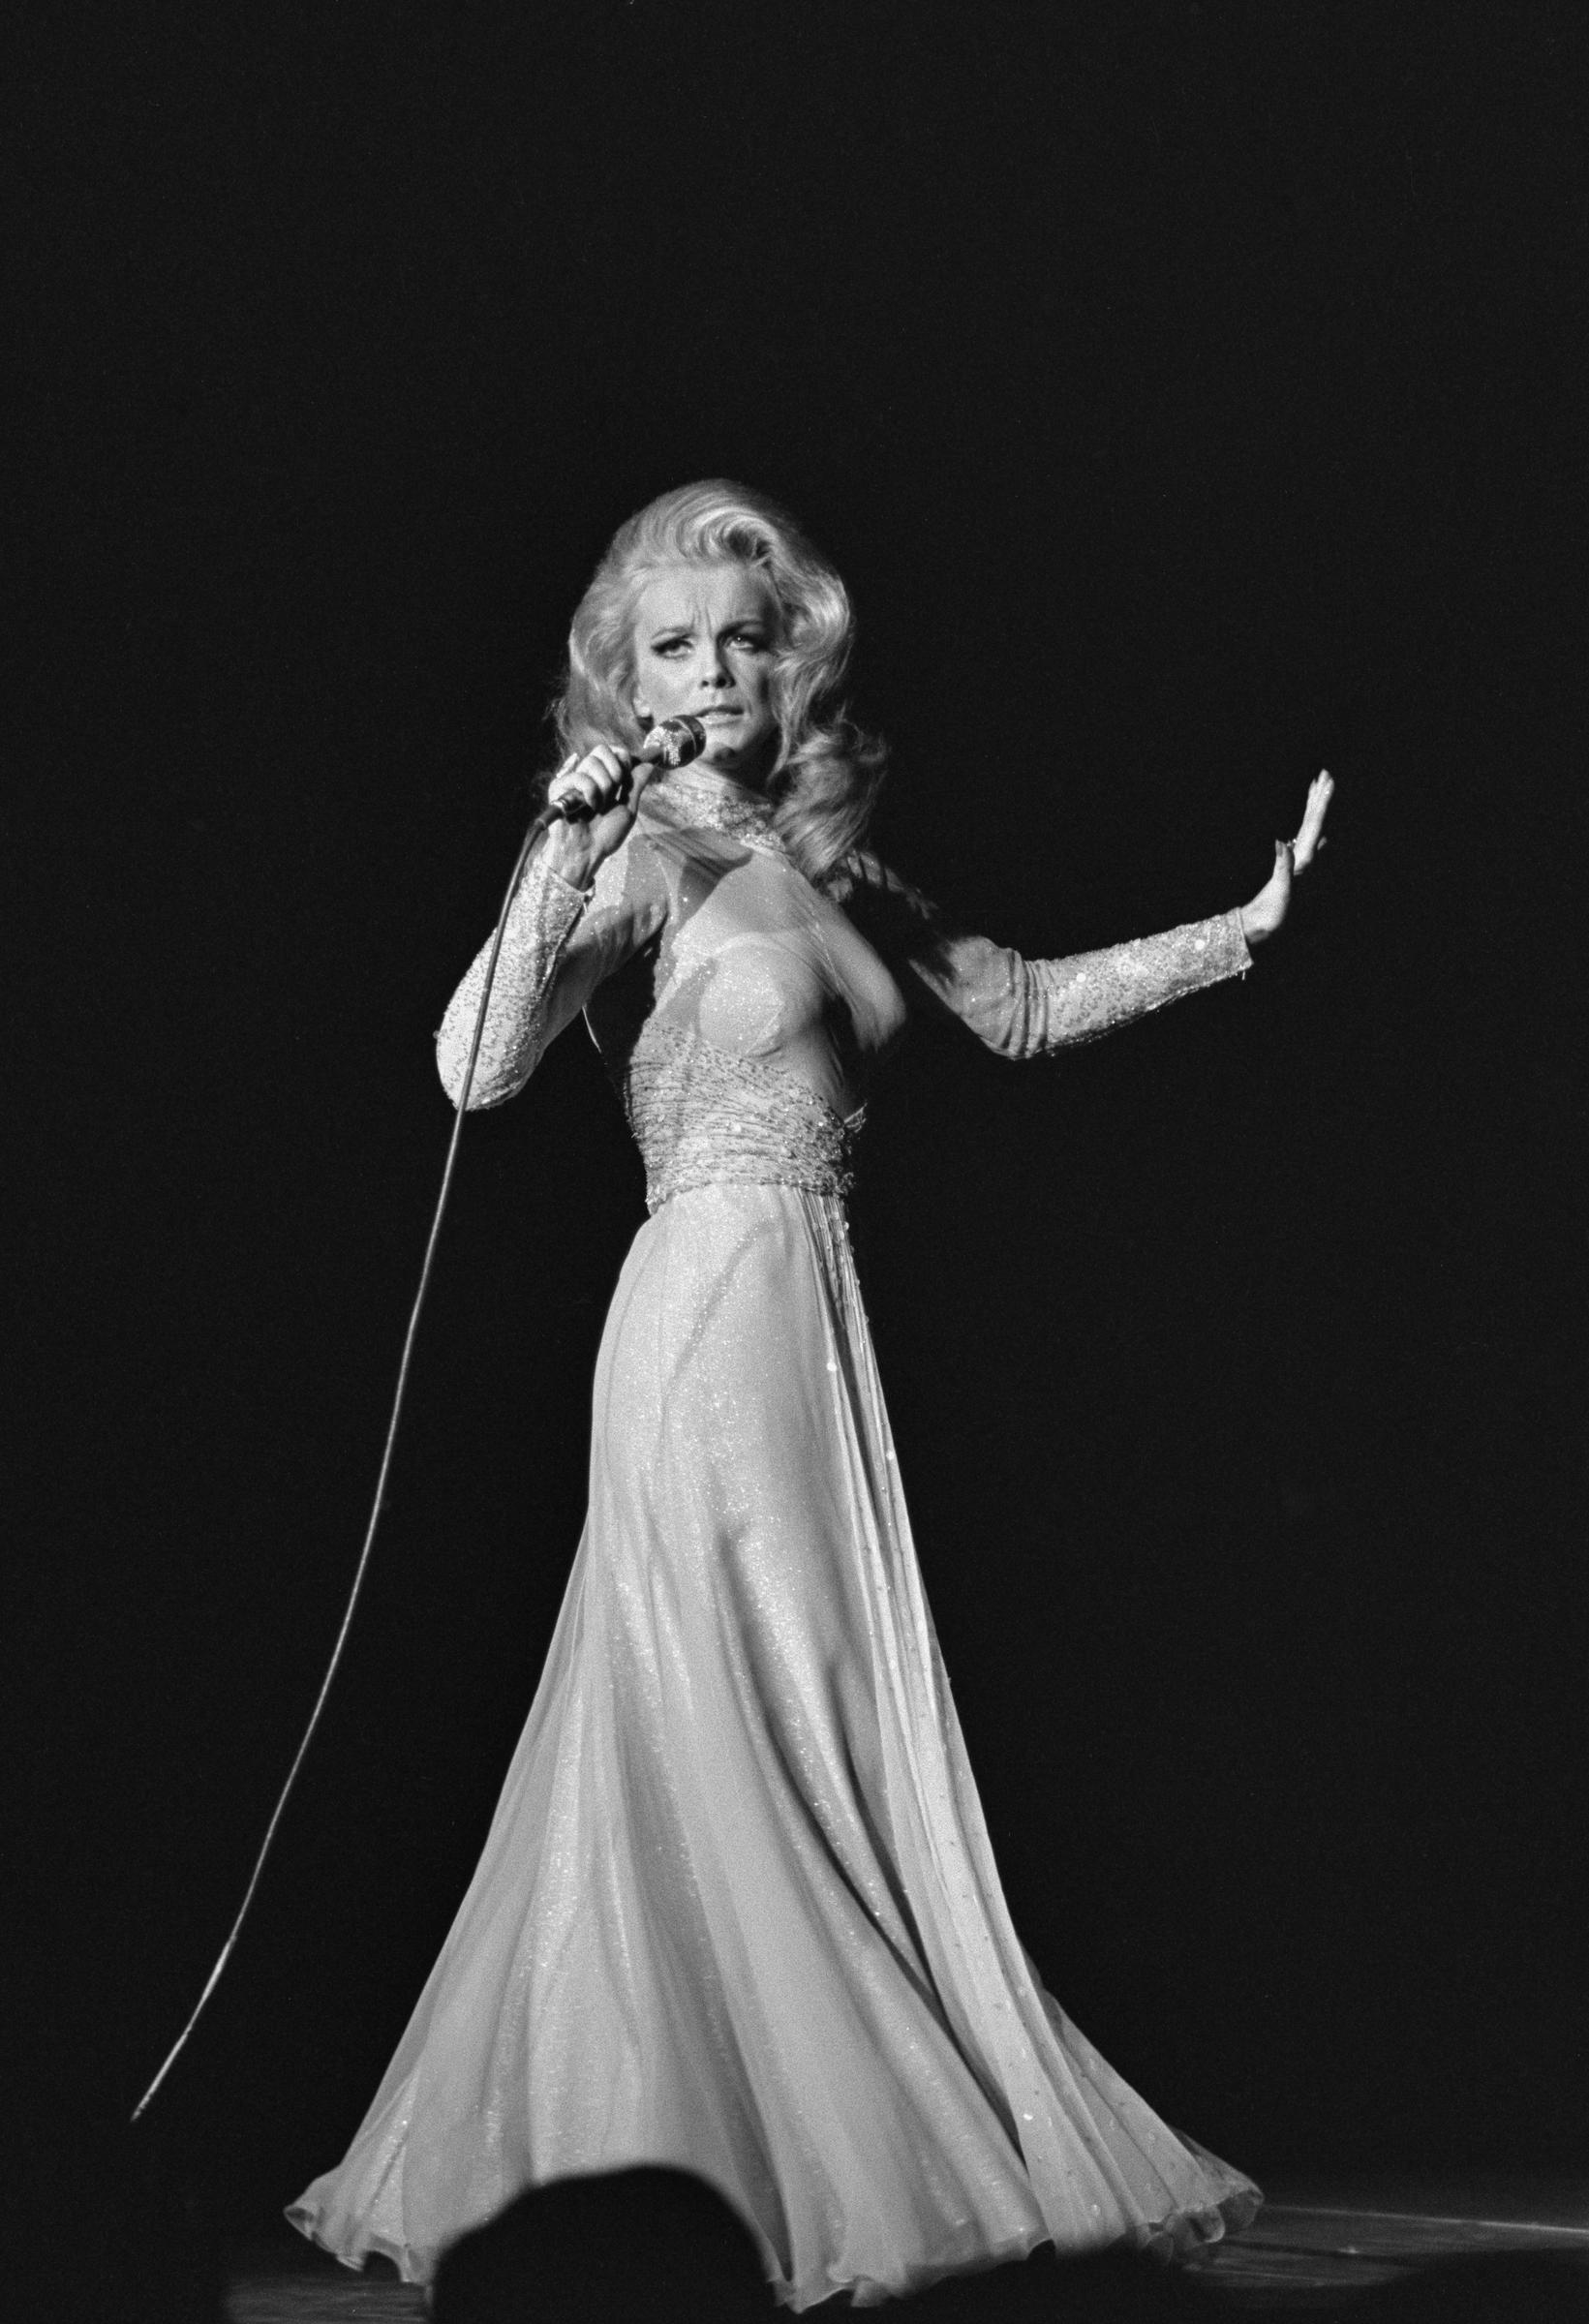 Ann-Margret performing at the Las Vegas Hilton on April 12, 1972 in Las Vegas. | Source: Getty Images